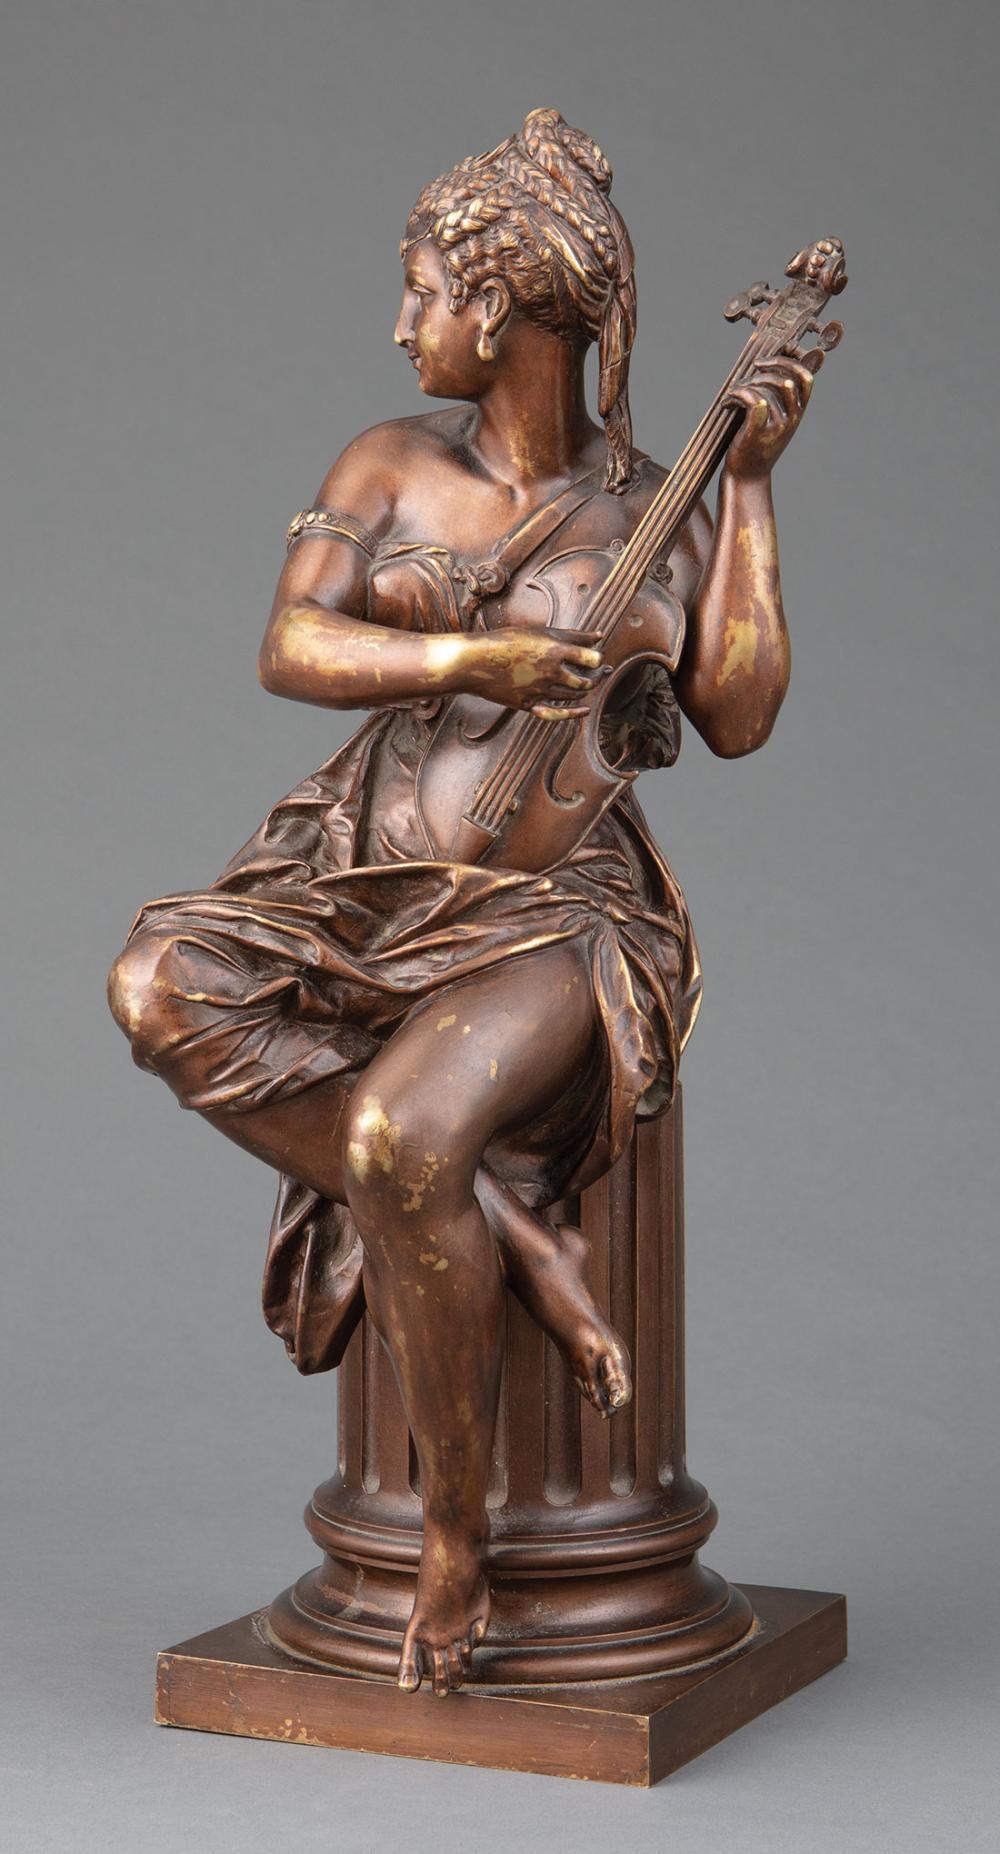 BRONZE FIGURE OF A WOMAN PLAYING